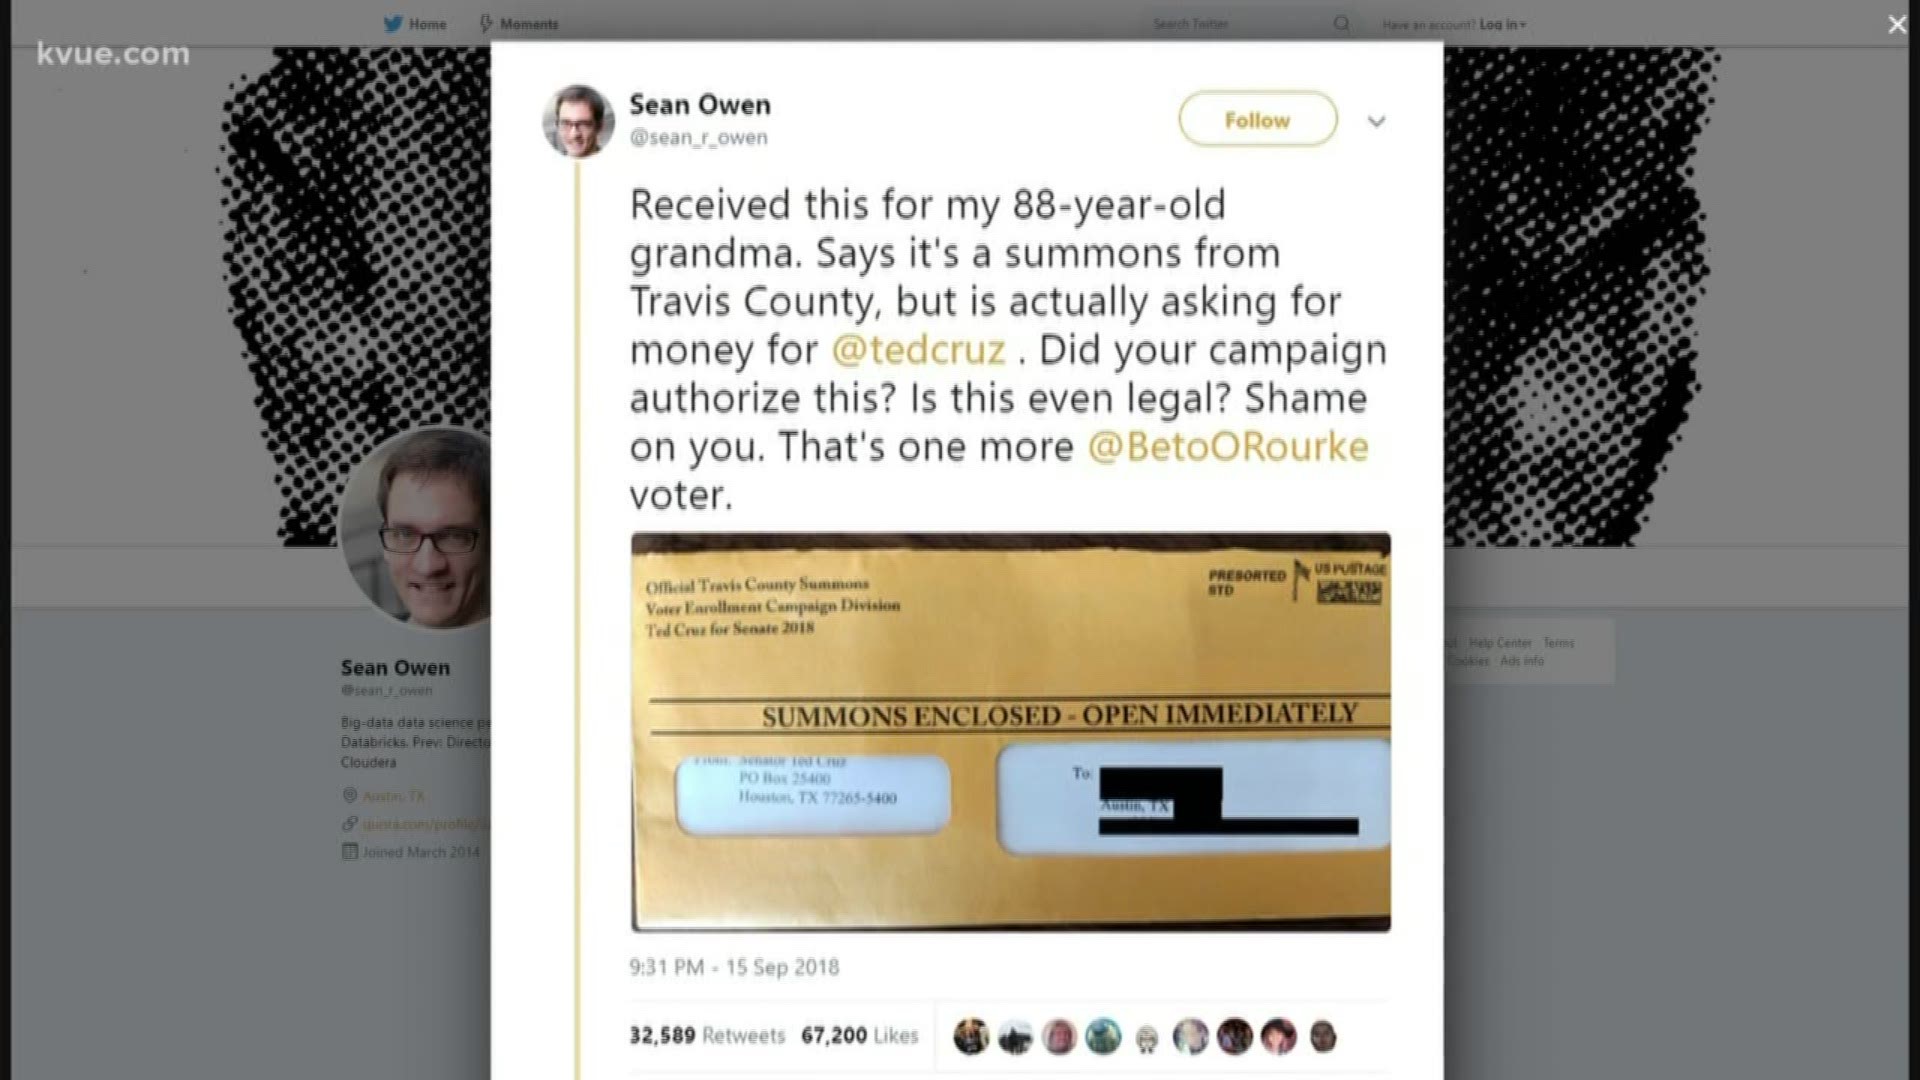 With just 50 days until the midterm elections, there's controversy over mailers sent out by what looks like the Ted Cruz campaign.